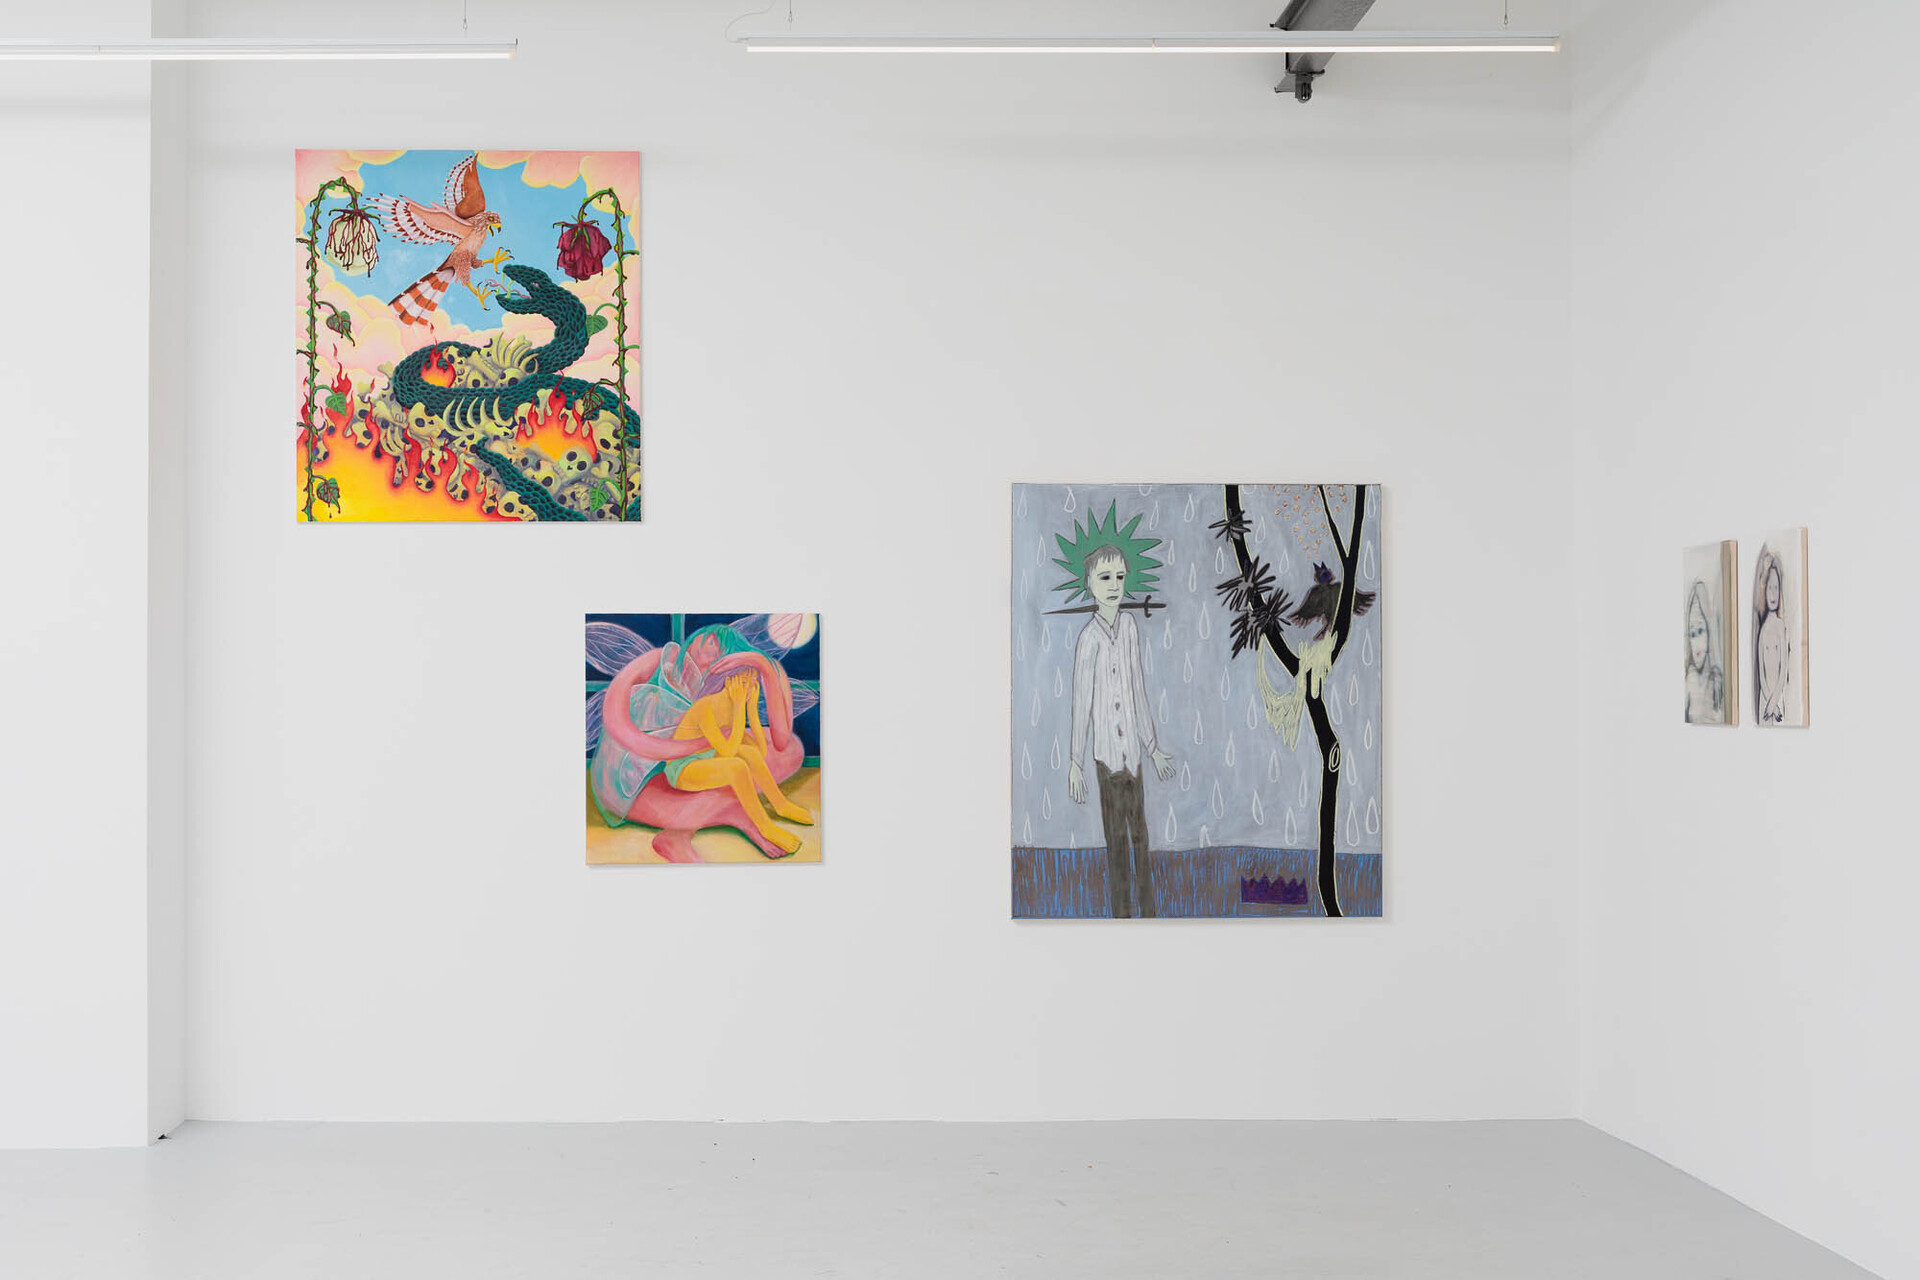 Jimmy Vuong, Die Ambition über Leichen zu gehen, Oil on canavs, 120 x 110 cm, 2022; Hannah Jeong, First Wing, 80 x 70 cm, Oil on canvas, 2022; Boris Saccone, Aquilin, 140 x 120 cm, Oil, charcoal and pastel on canvas, 2022; Sarah Neumann, Traum I, 50 x 40 cm, Oil and oil pastel on canvas, 2022; Sarah Neumann, Traum I I, 50 x 40 cm, Oil and oil pastel on canvas, 2022 (left to right)